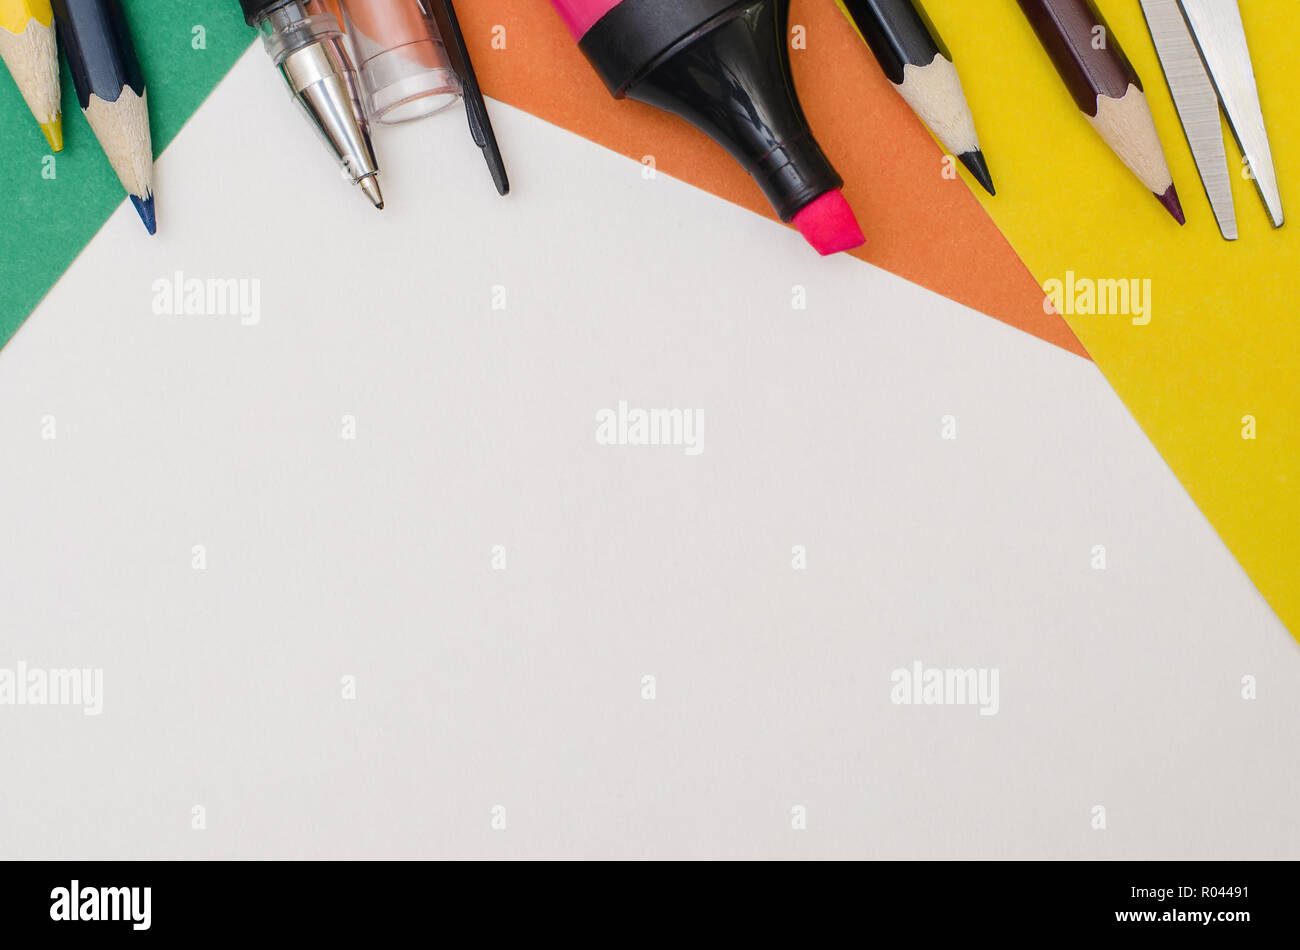 School supplies, stationery accessories on paper background. Top view. Stock Photo